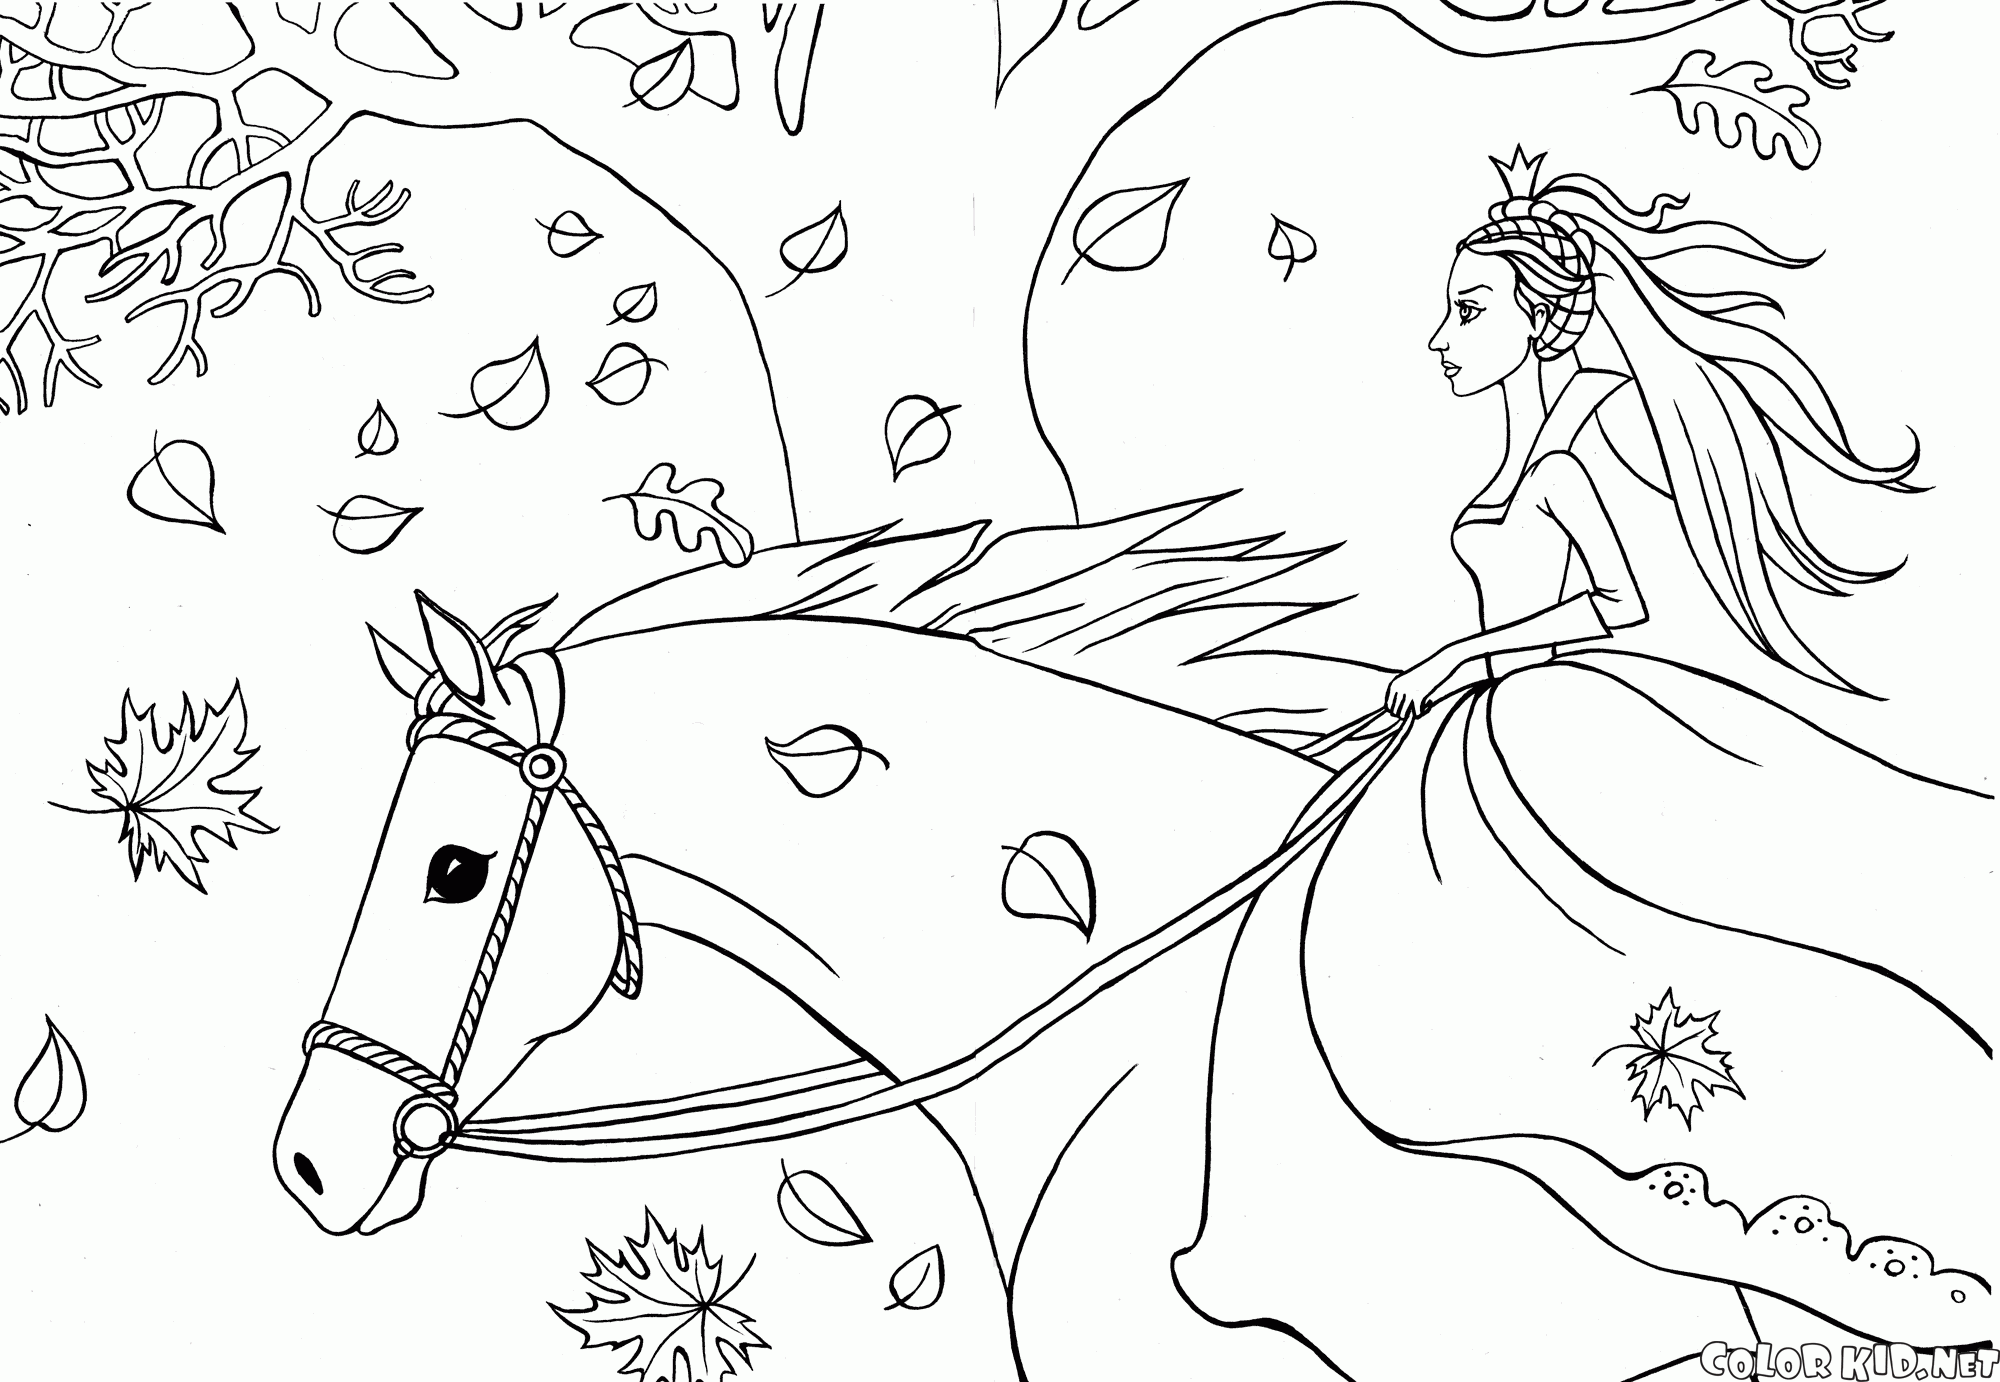 Coloring page - HORSE RIDING